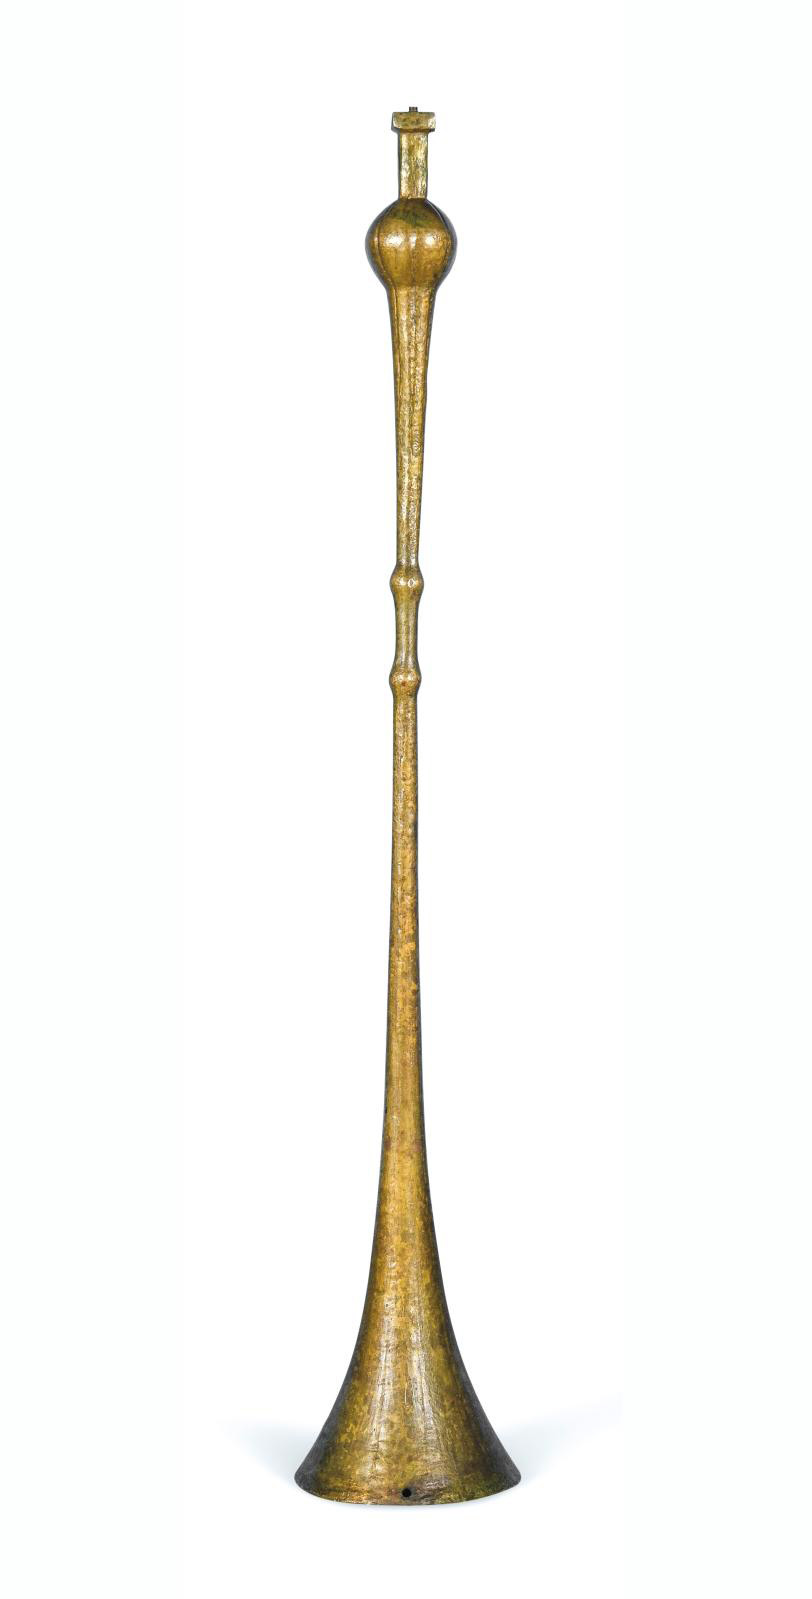 A Trompette Floor Lamp by Alberto Giacometti, A Very Limited Edition